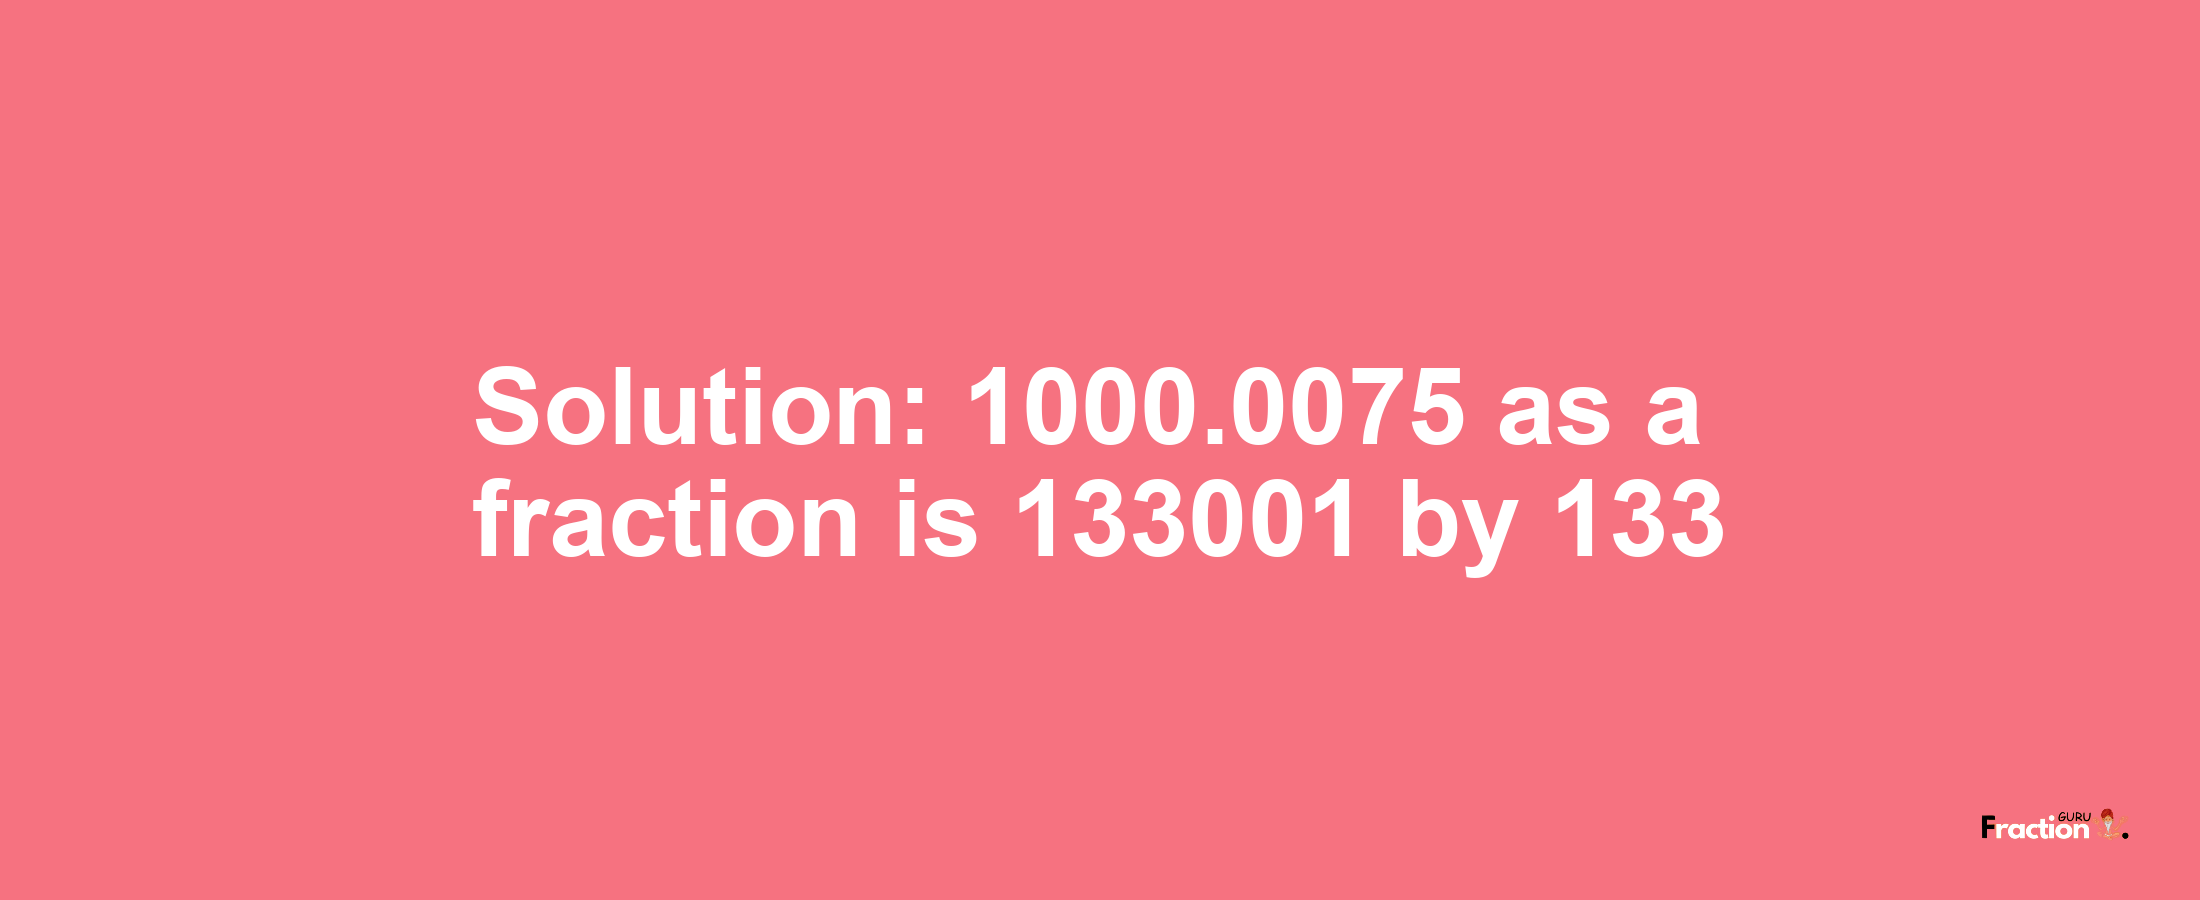 Solution:1000.0075 as a fraction is 133001/133